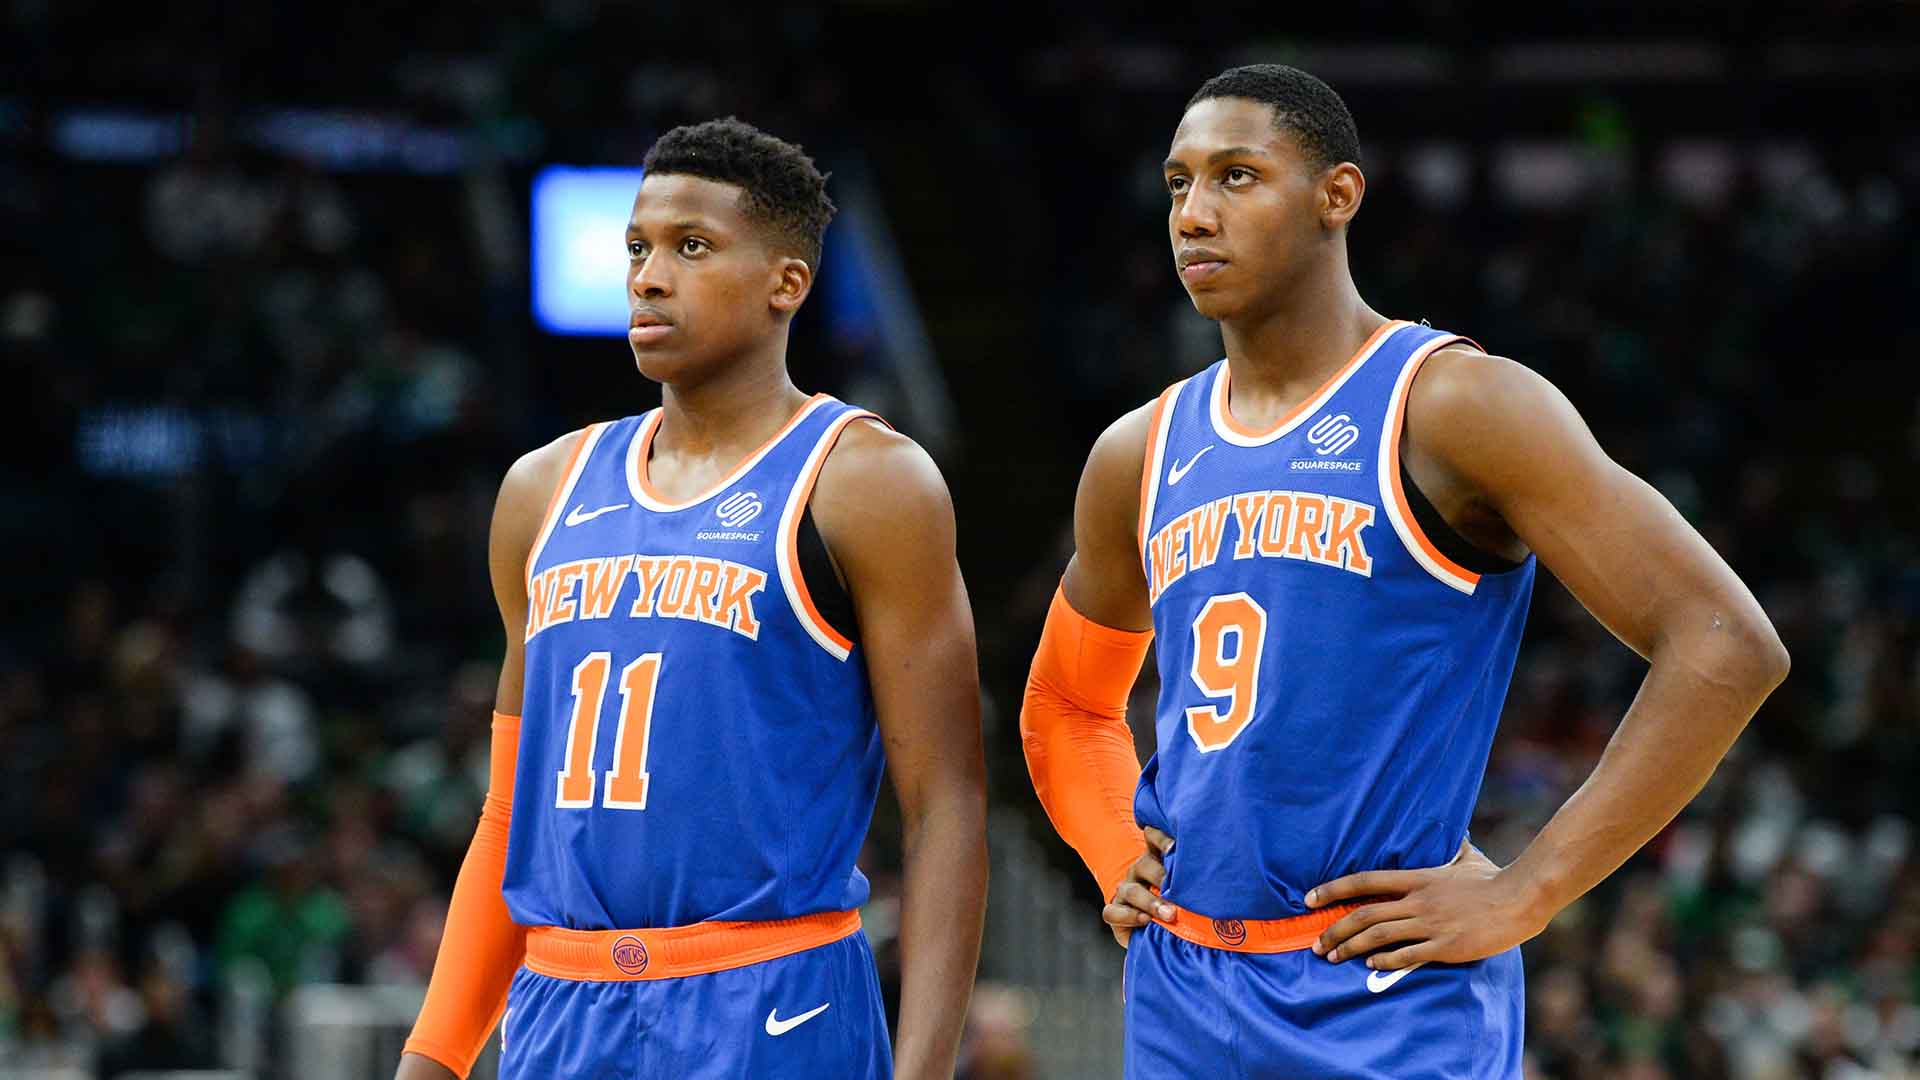 Barrett and Ntilikina Impress Together As Fizdale Switches Things Up